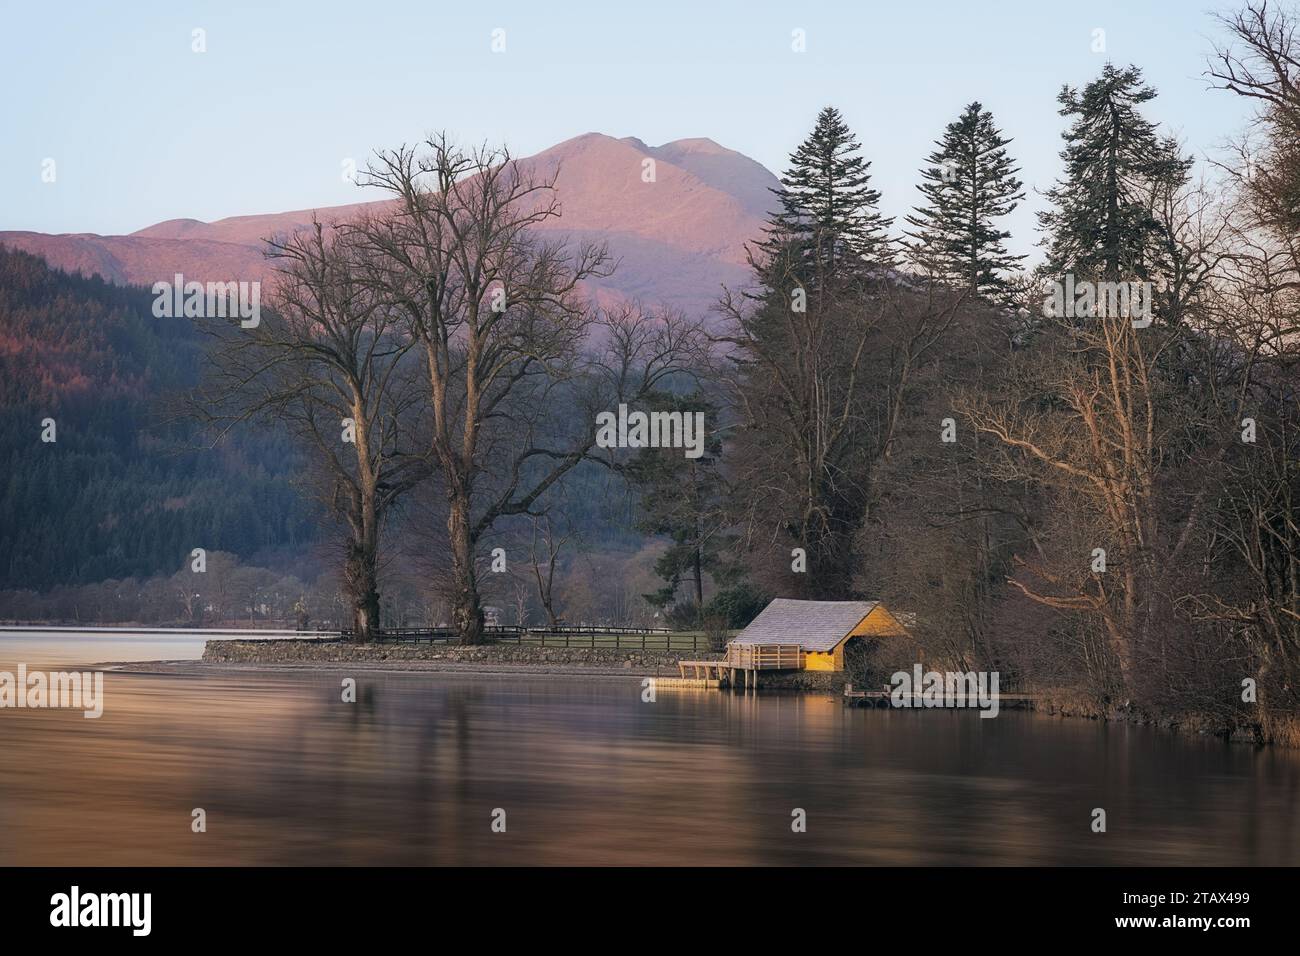 Selection of Trossachs Images Stock Photo